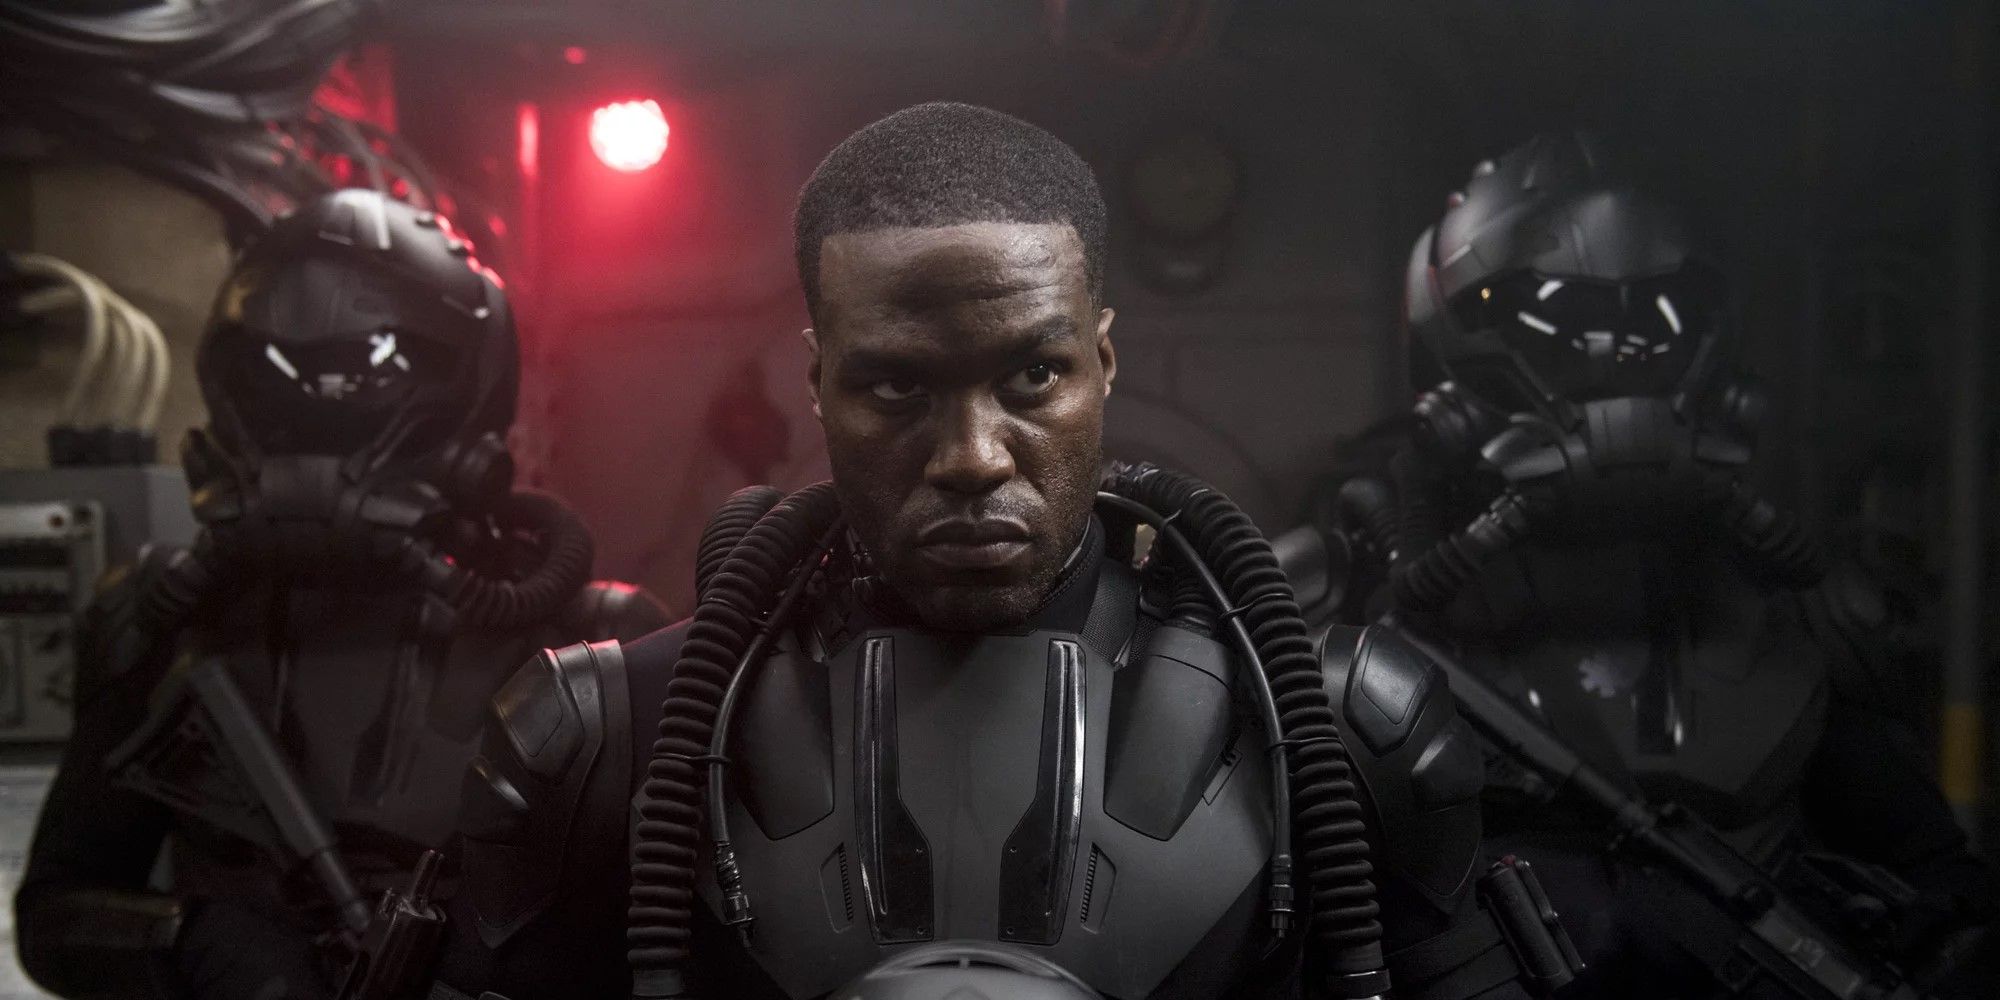 An image of Black Manta in Aquaman with his henchmen